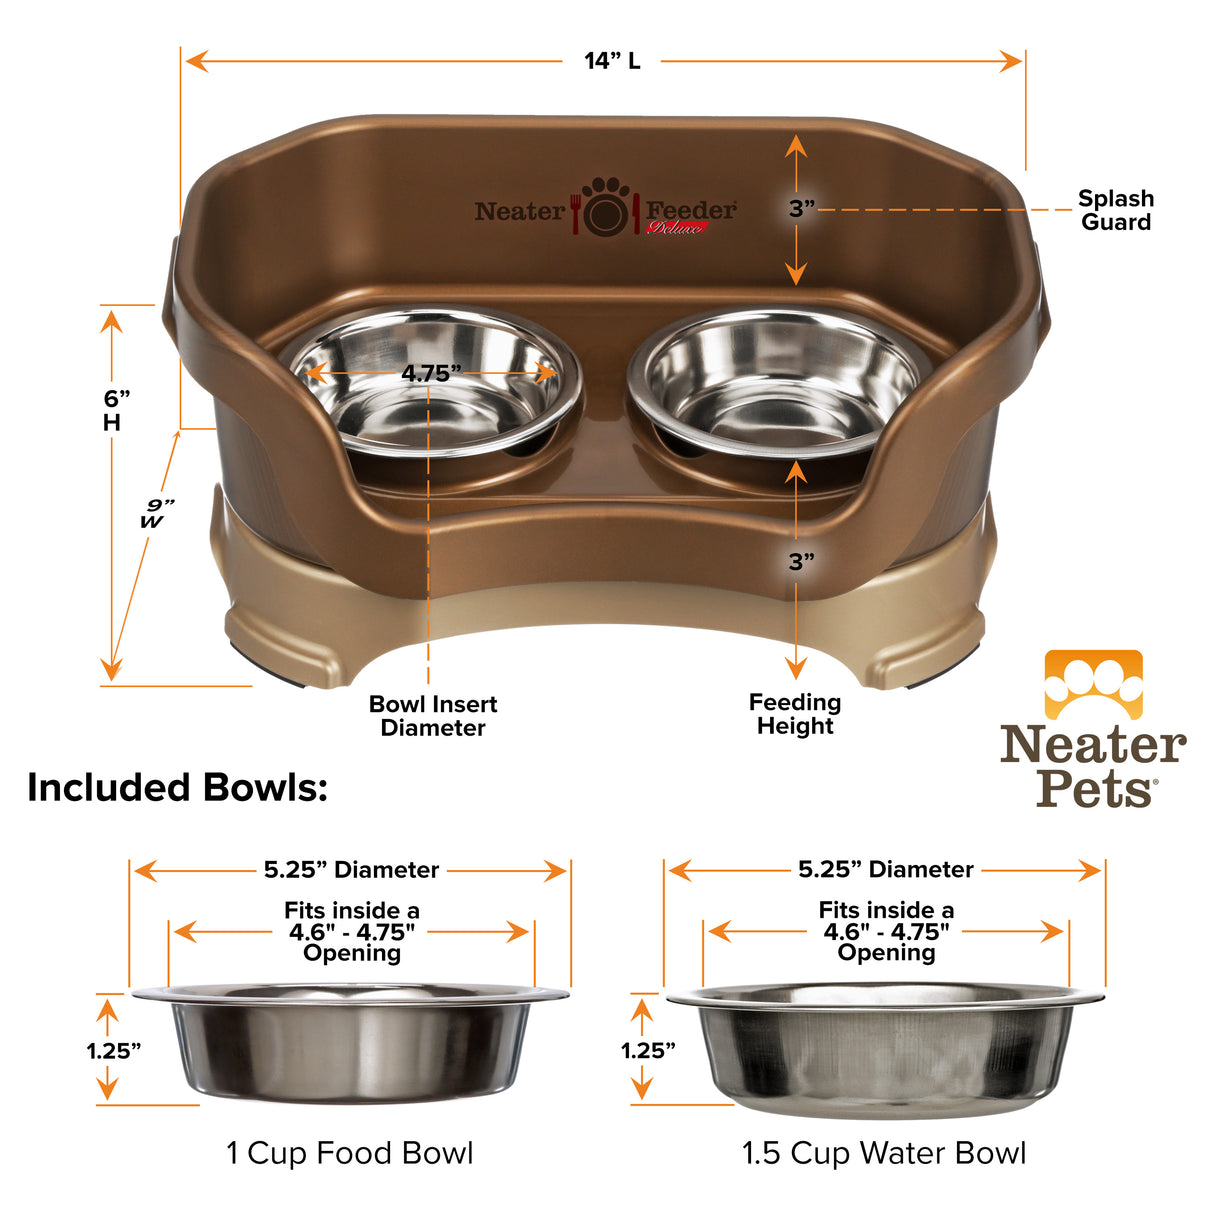 Deluxe Bronze Cat Neater Feeder and Bowl dimensions